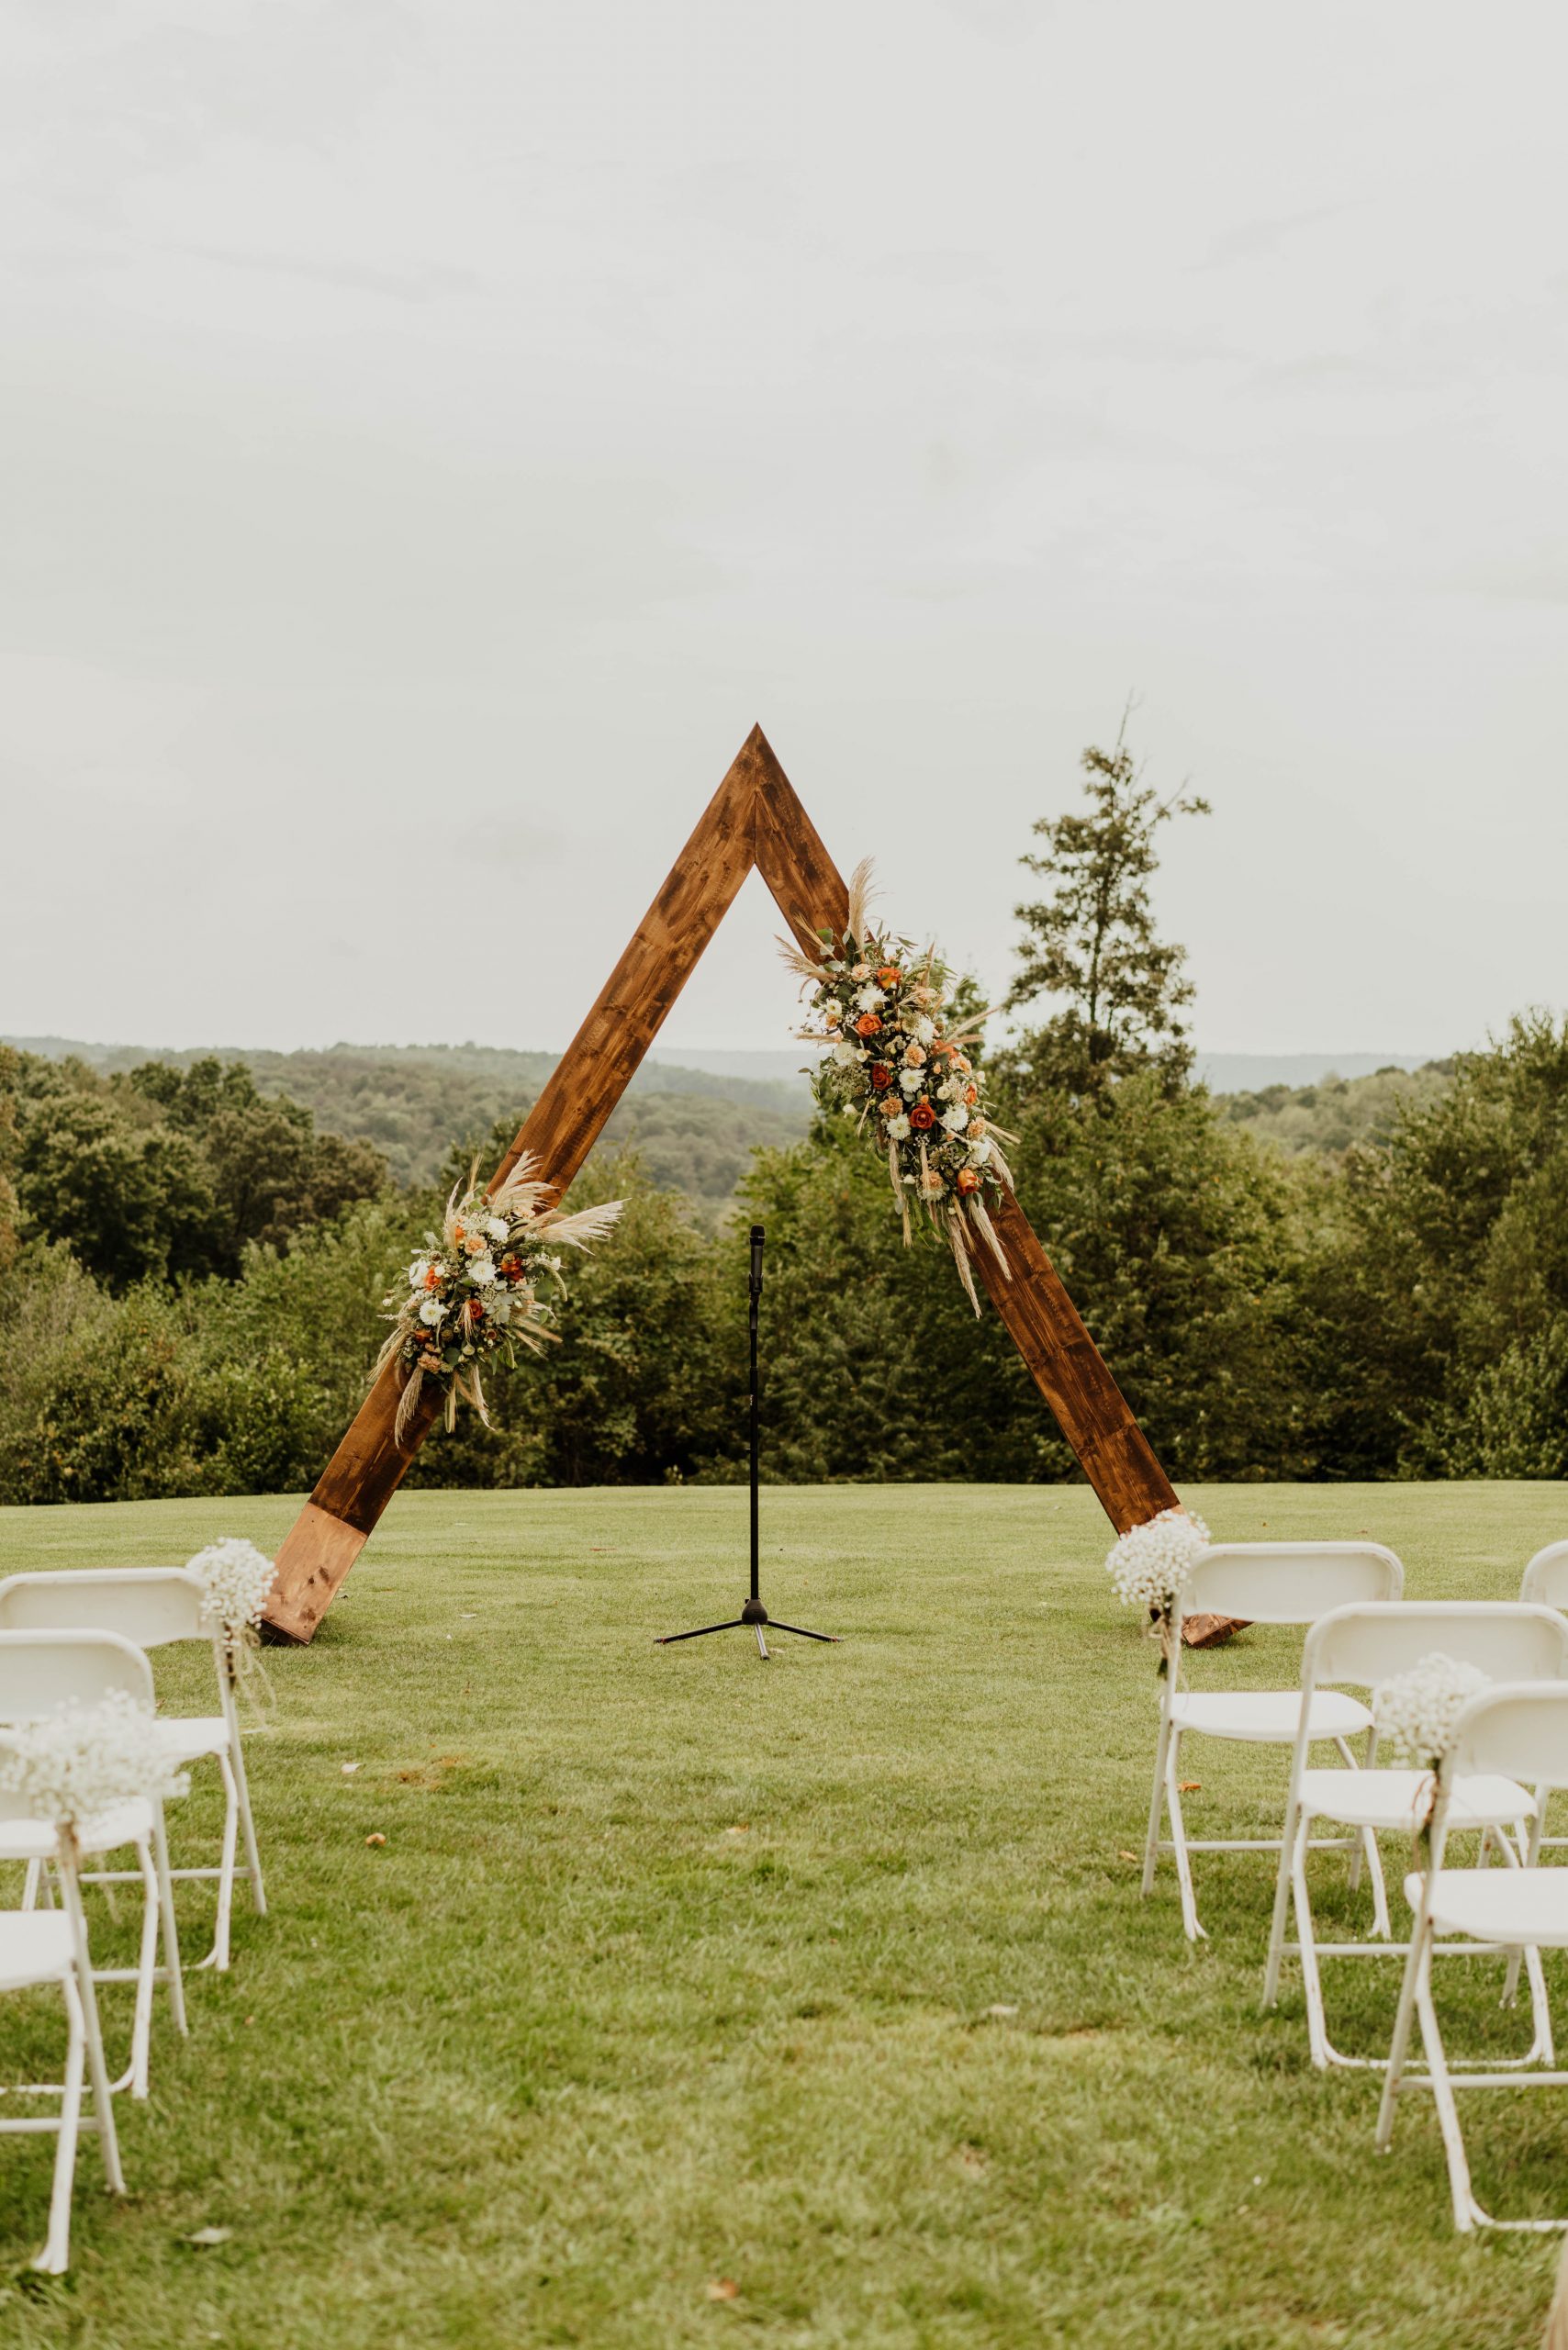 Alex and Phil hosted their boho-style wedding at The Punxsutawney Country club with an outdoor celebration on a warm summer day